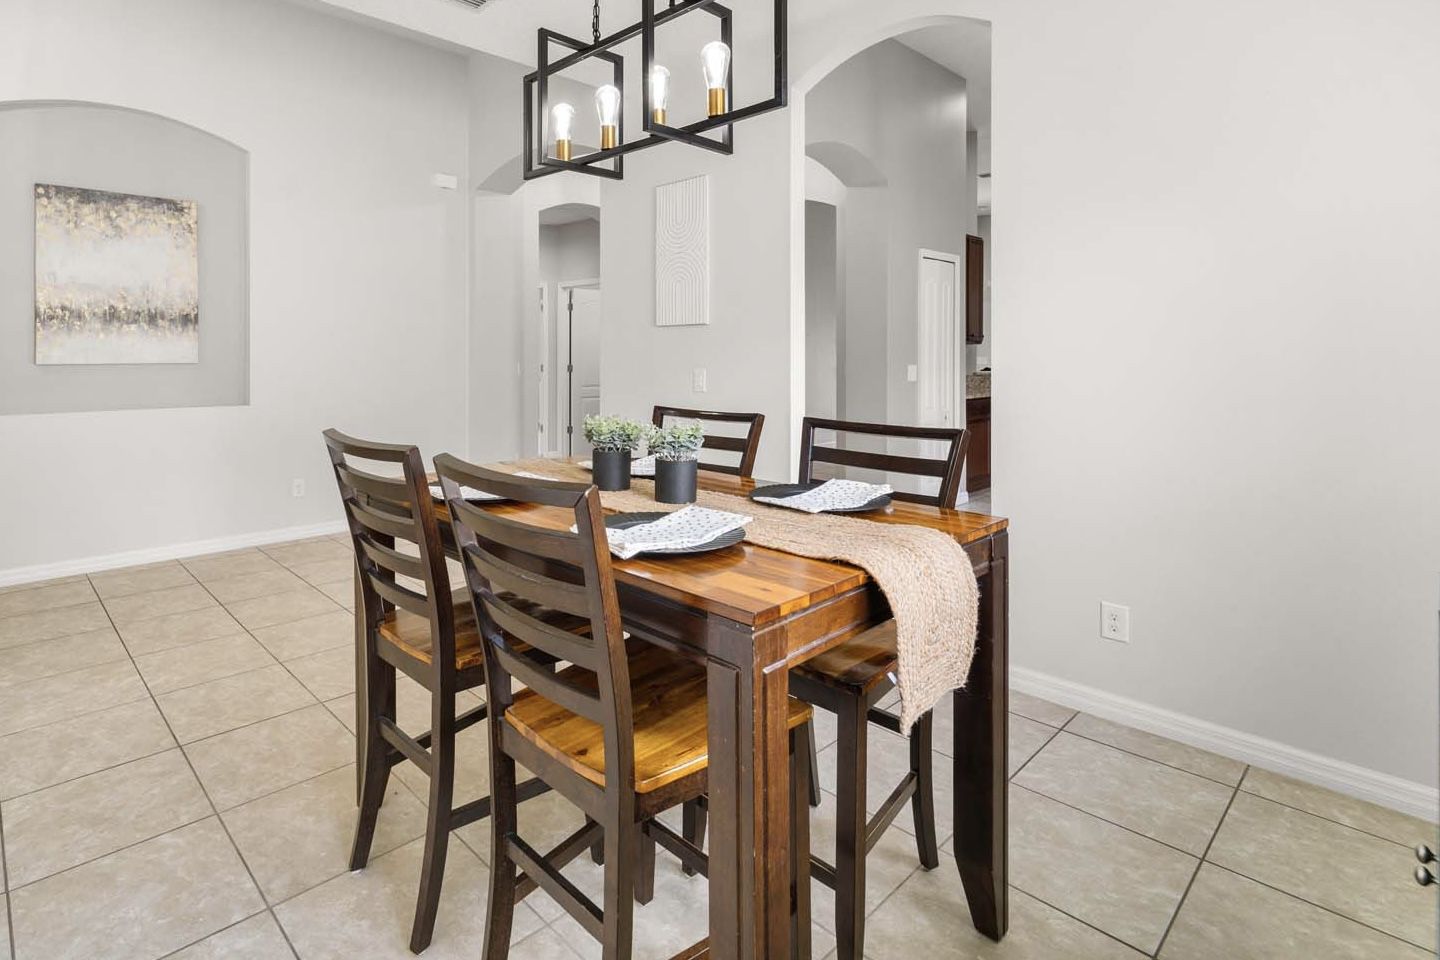 Extendable Dining Table + Chairs